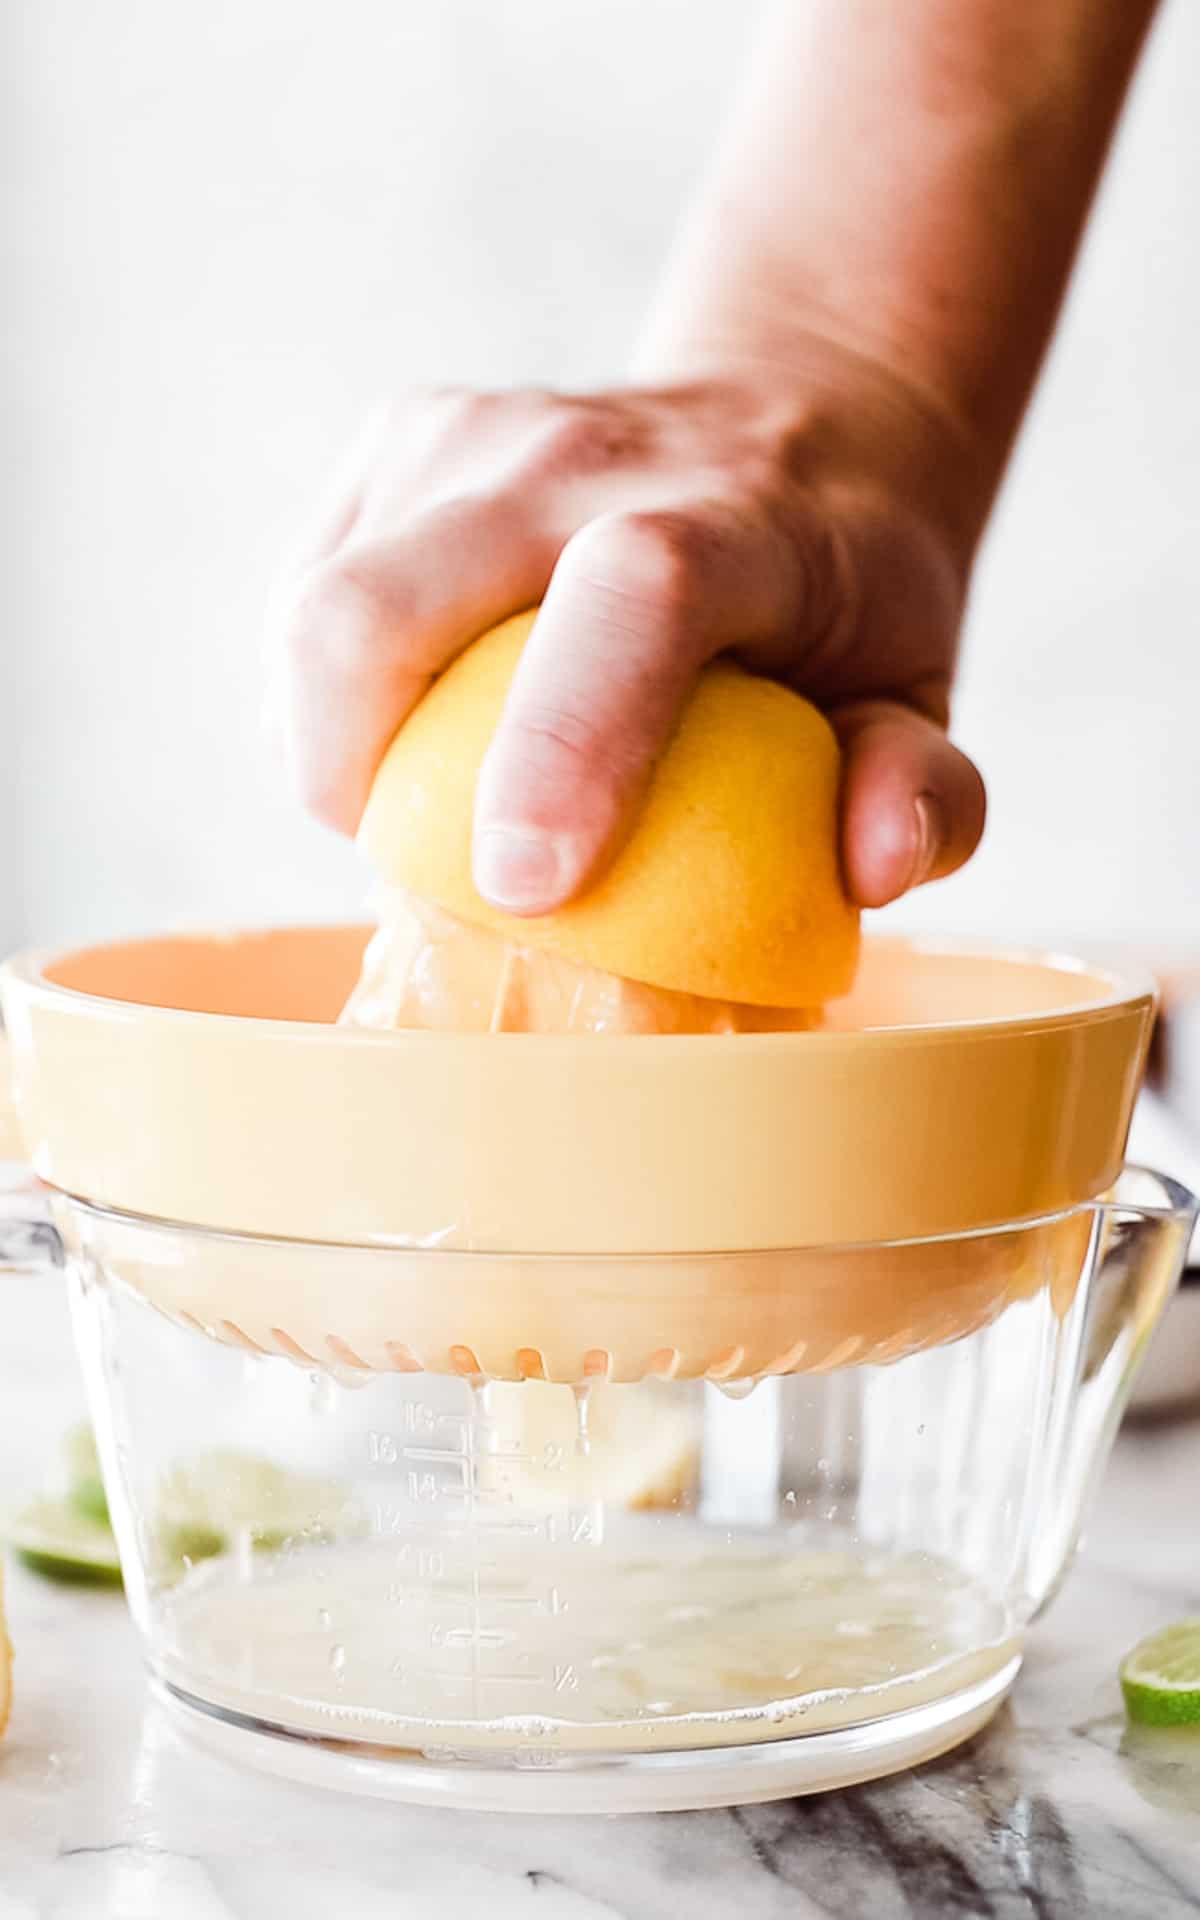 A hand juicing a lemon with a hand juicer. 